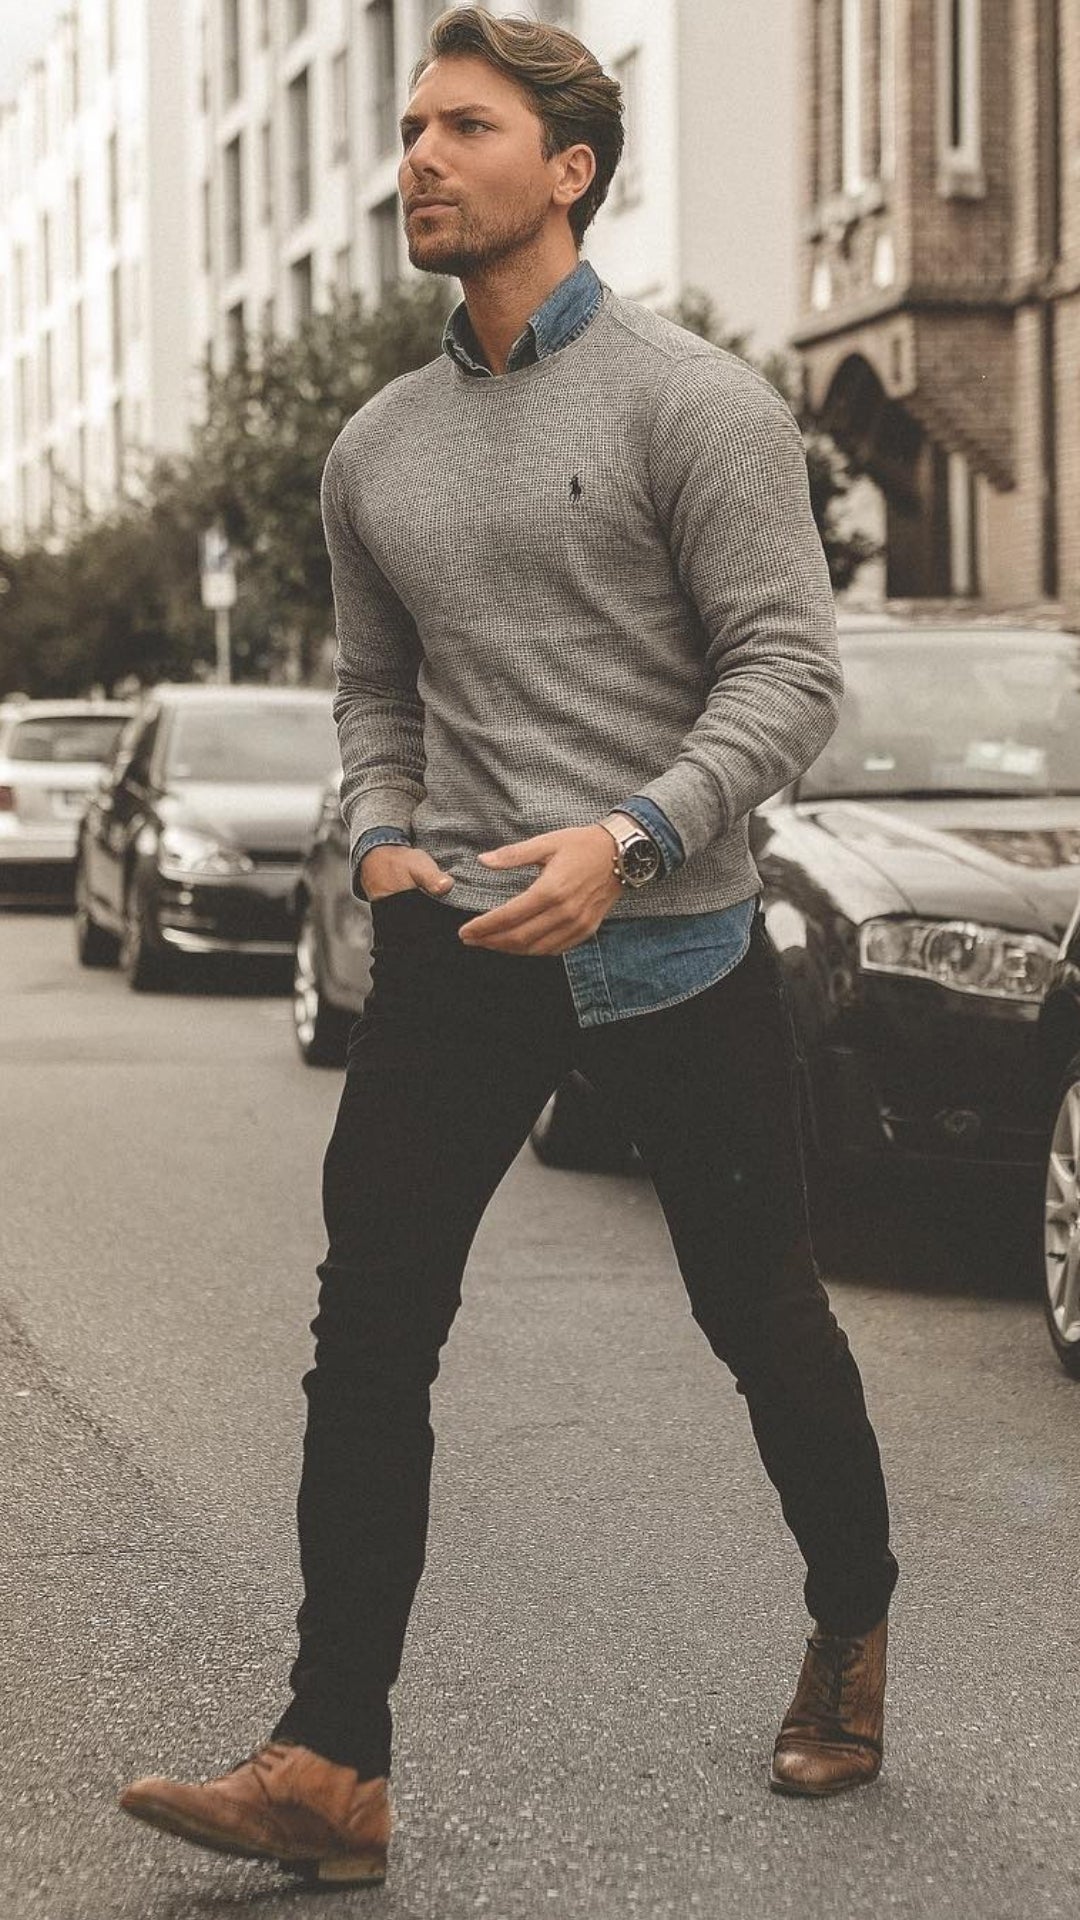 Cool sweater outfits for men #mensfashion #sweater #outfits #streetstyle